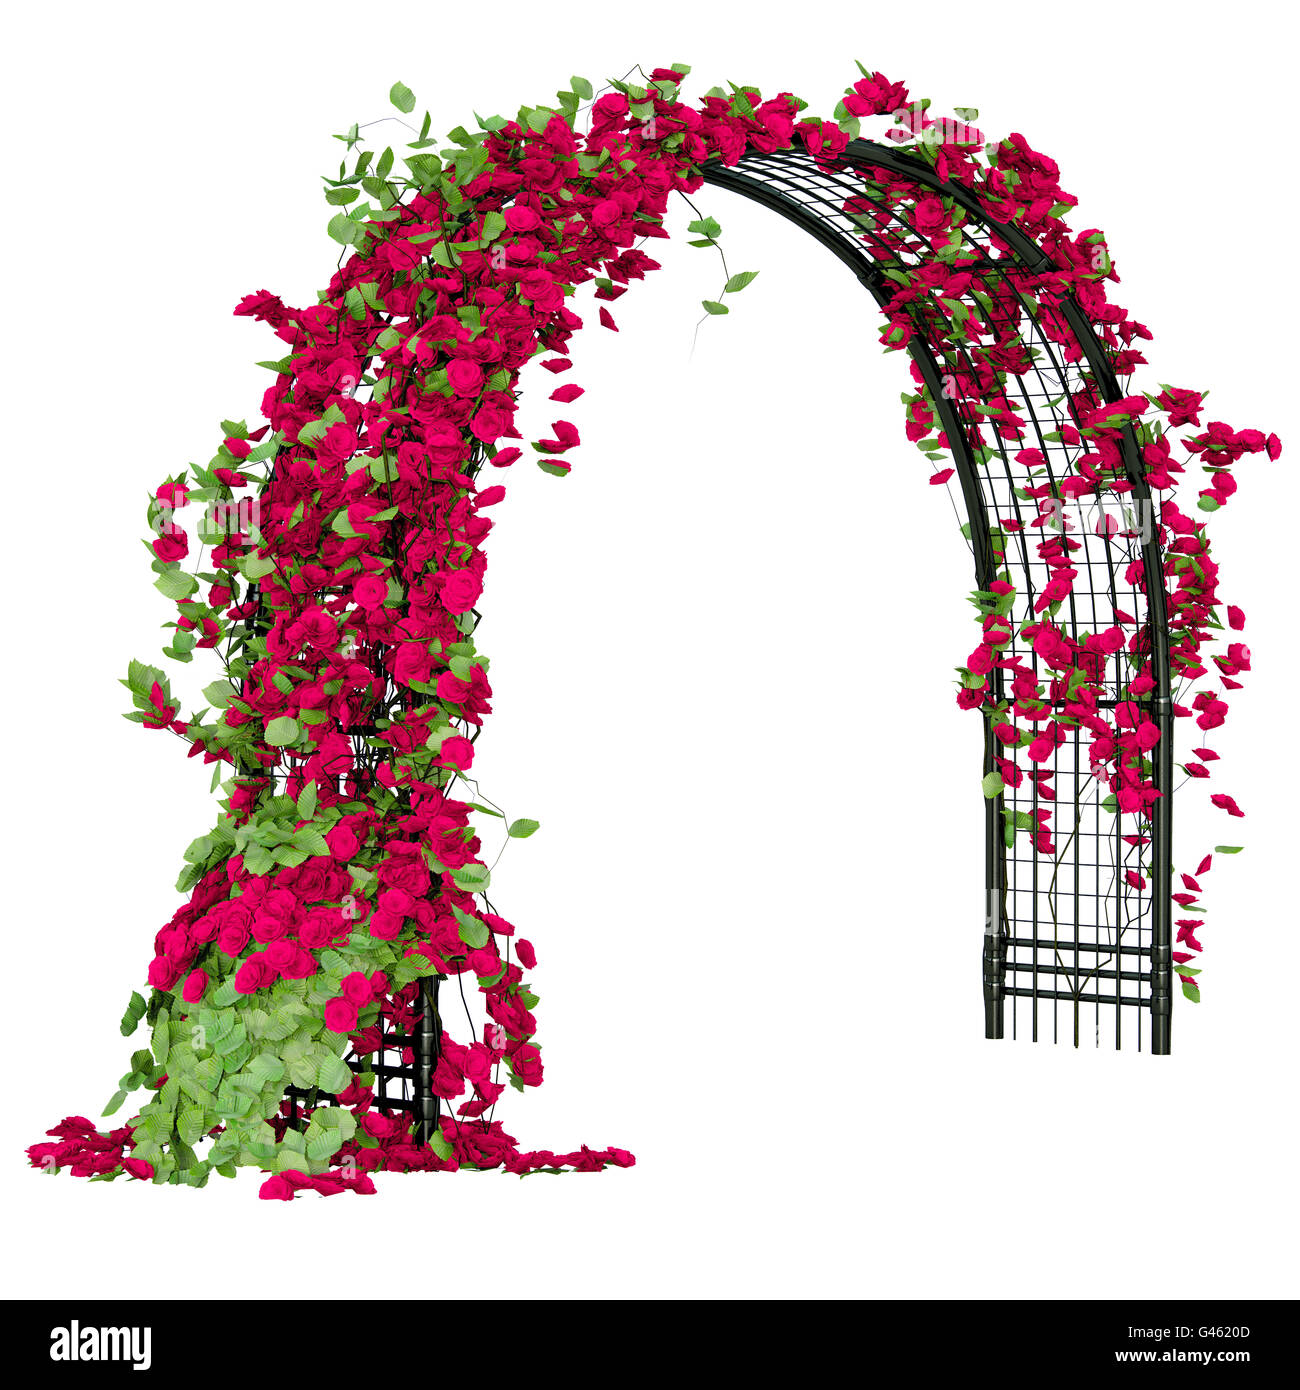 Arched pergola with roses Stock Photo